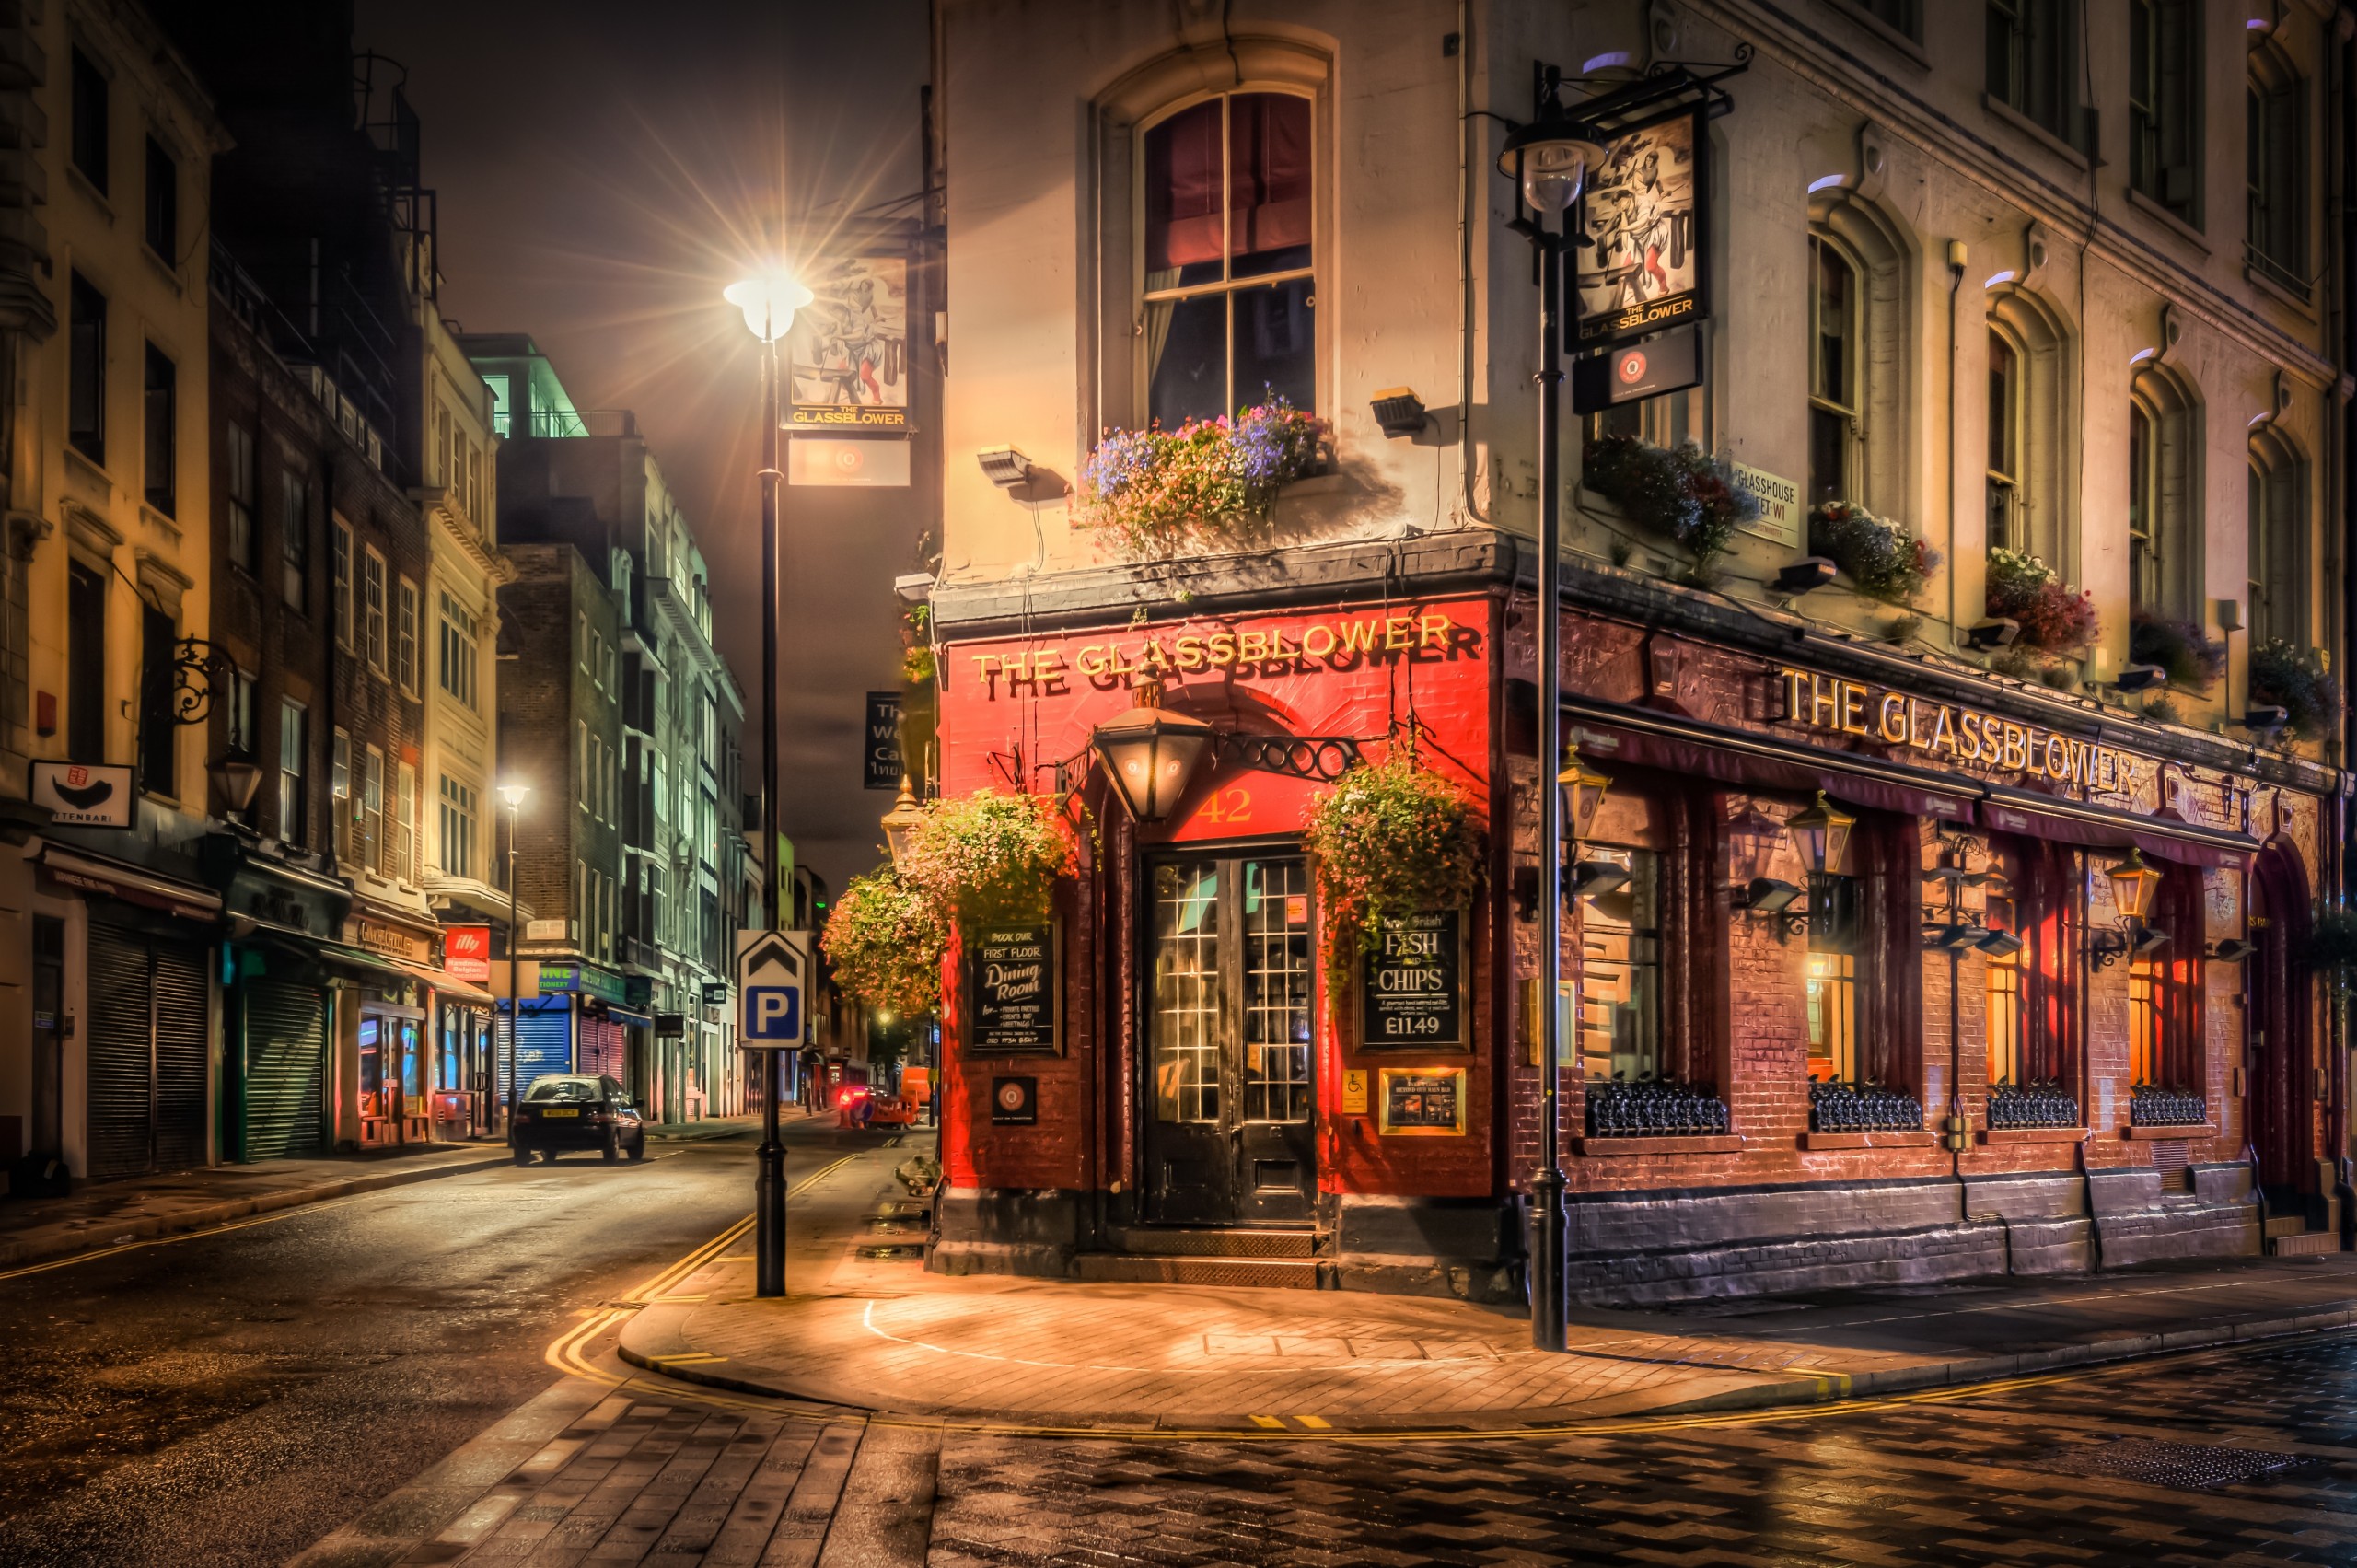 Download 2560x1703 London Houses, Street, Cafe, England Wallpaper